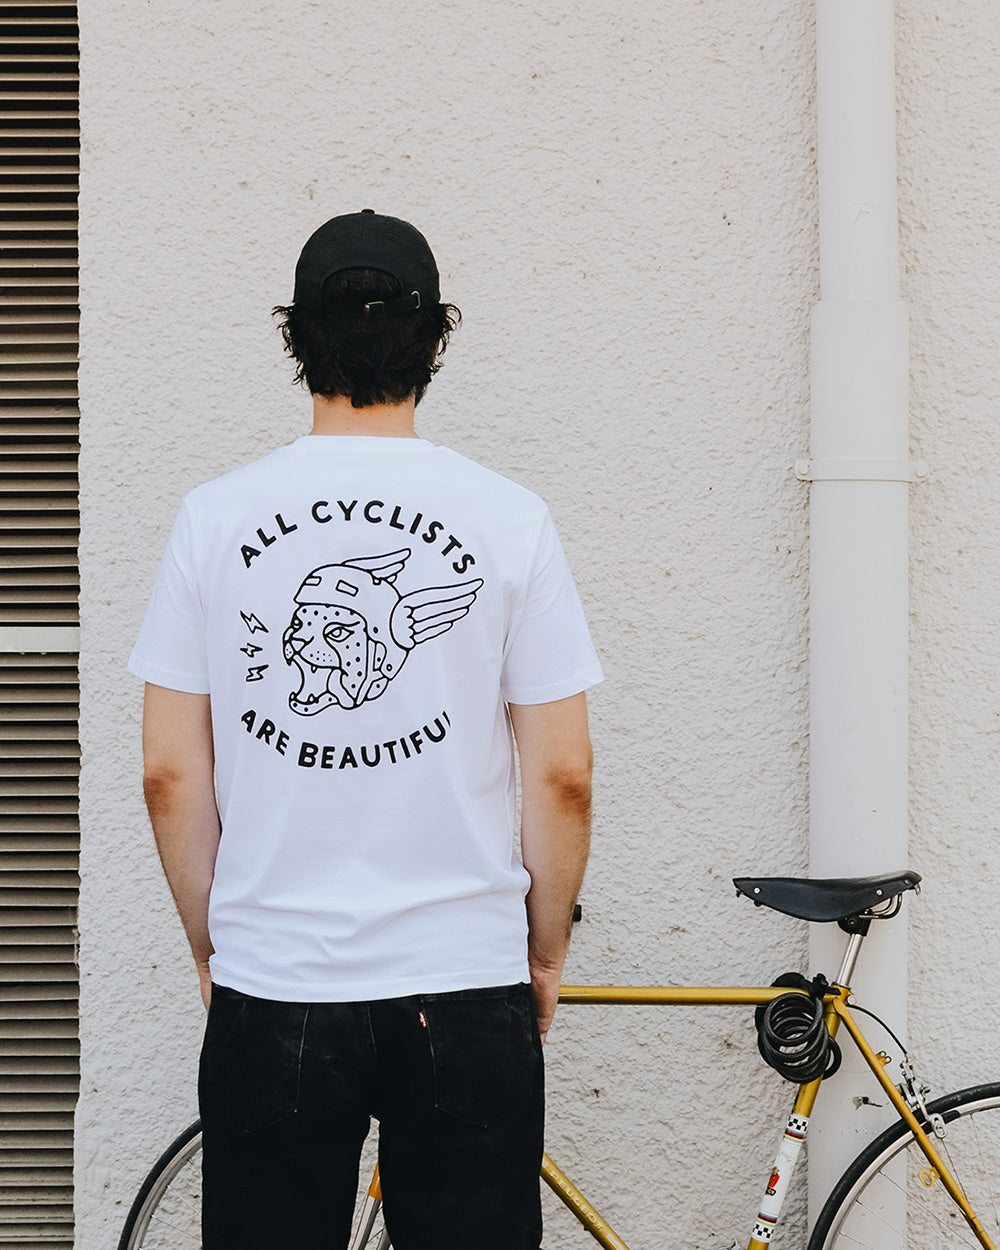 All Cyclists Are Beautiful